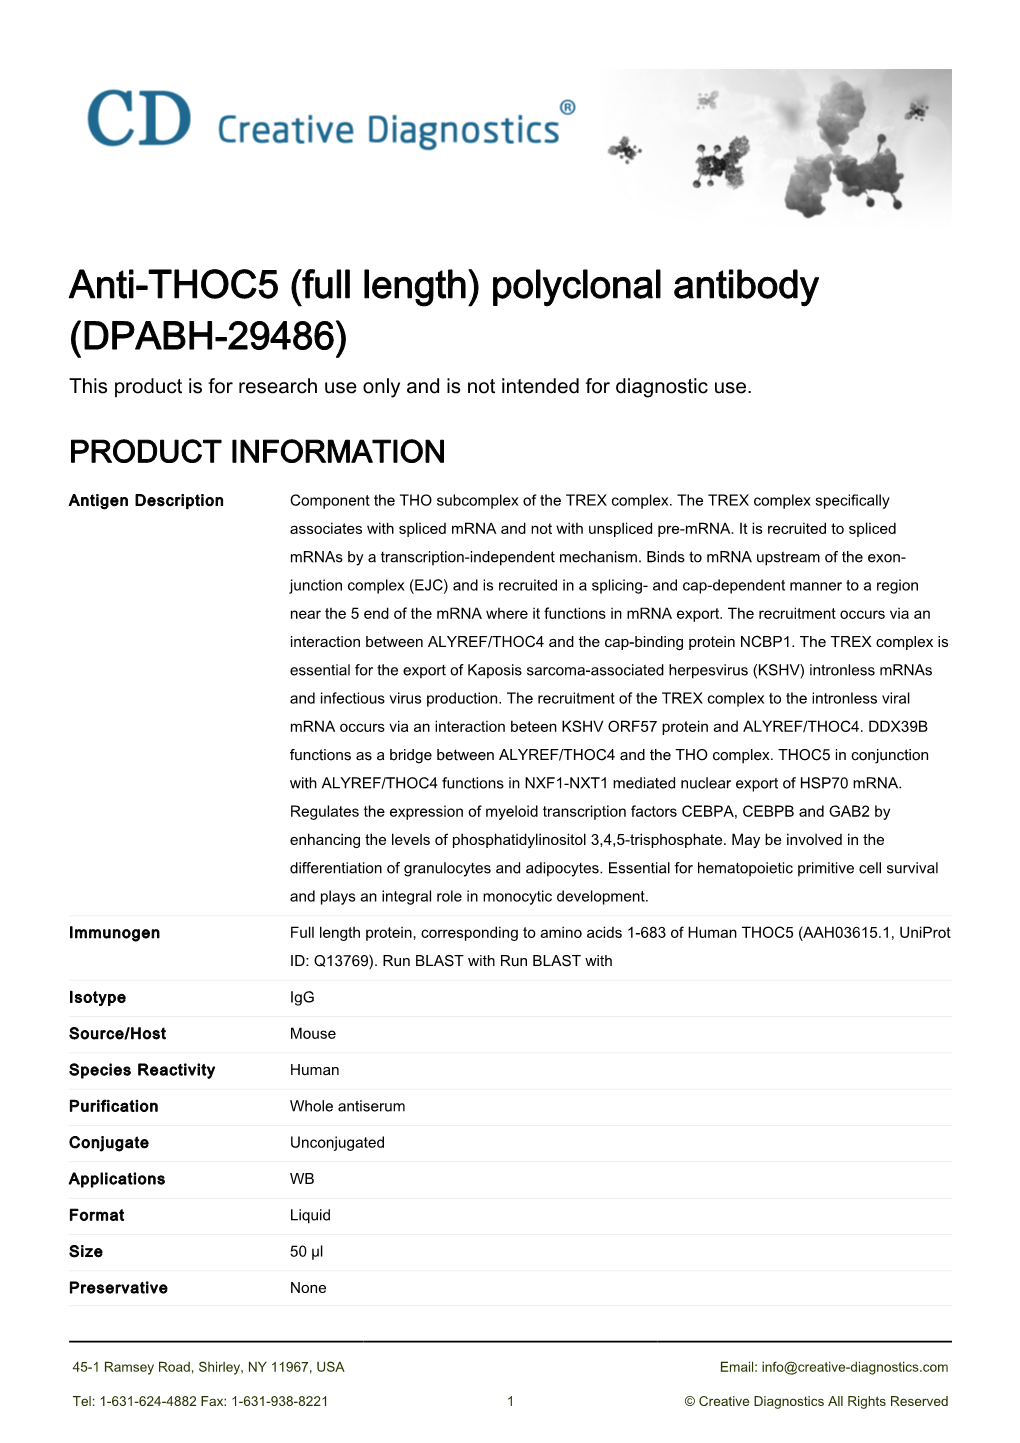 Anti-THOC5 (Full Length) Polyclonal Antibody (DPABH-29486) This Product Is for Research Use Only and Is Not Intended for Diagnostic Use